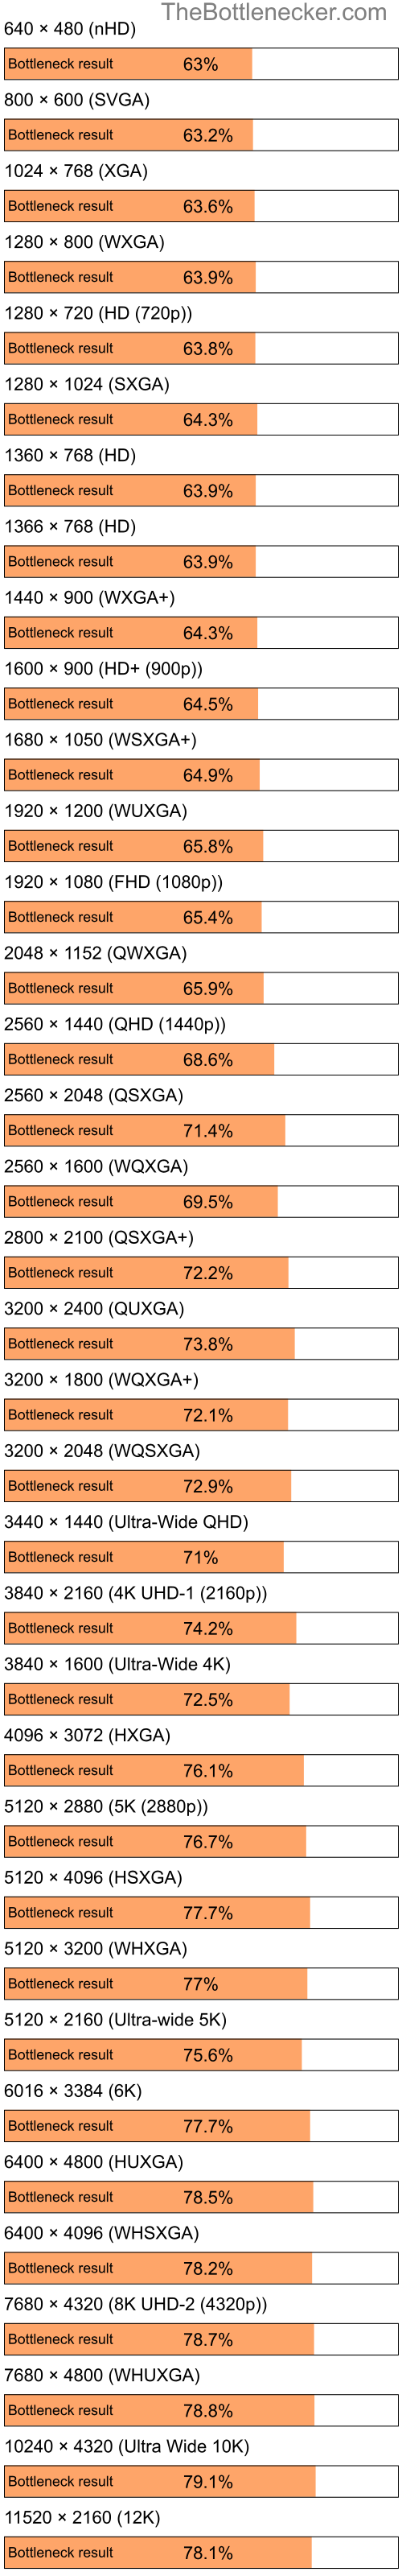 Bottleneck results by resolution for Intel Celeron and AMD Mobility Radeon HD 3470 in General Tasks